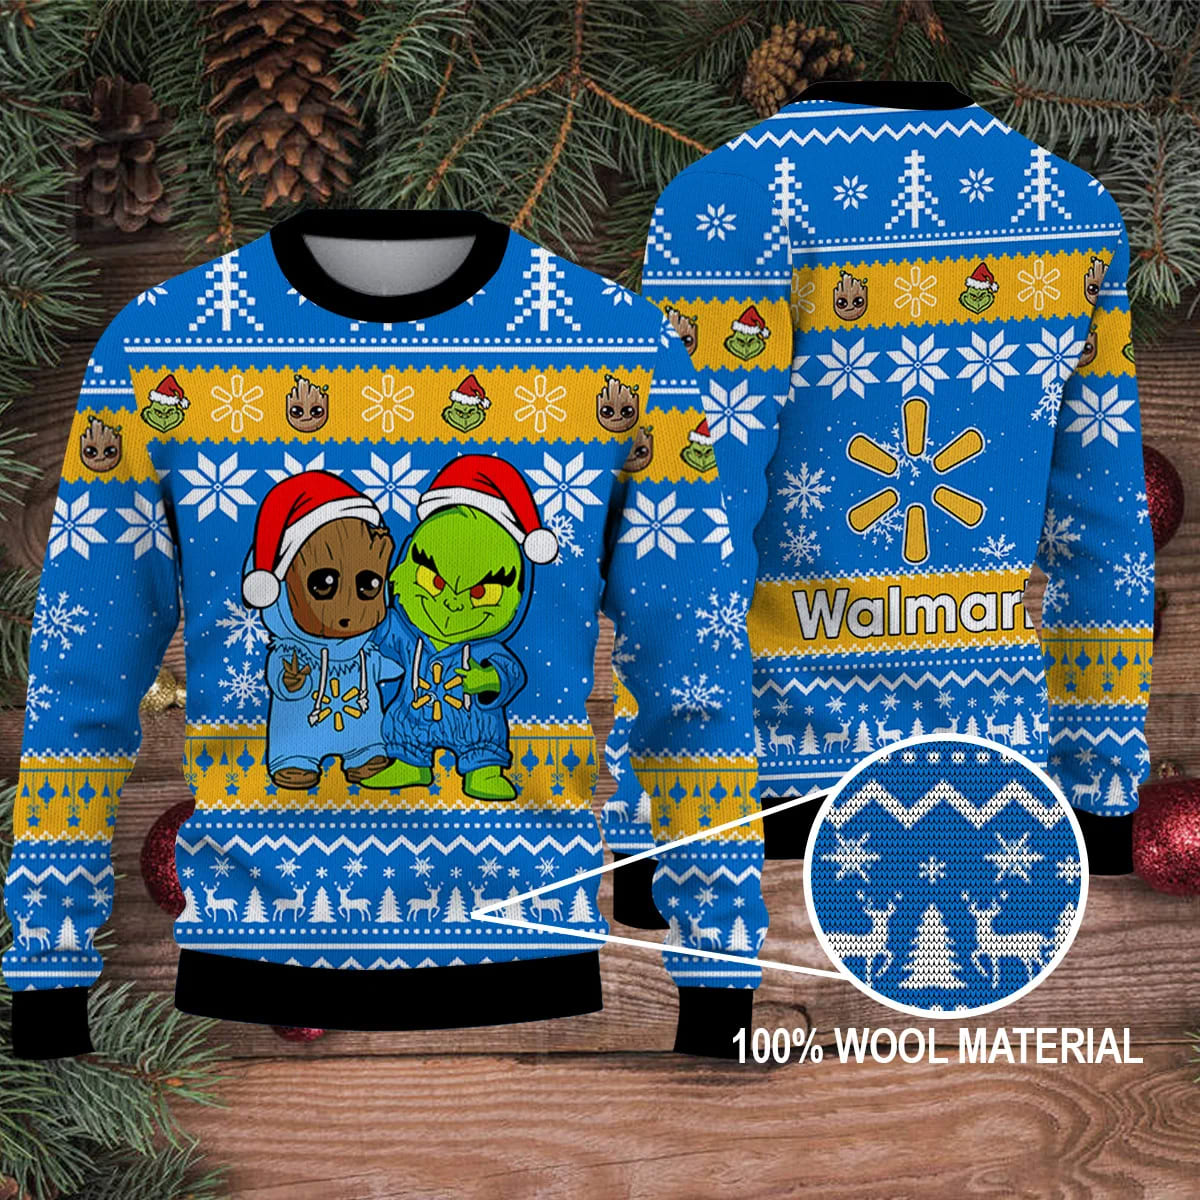 Grinch Movie 2023 The Grinch Merry Christmas Ugly Sweater Walmart Dscqee.jpg